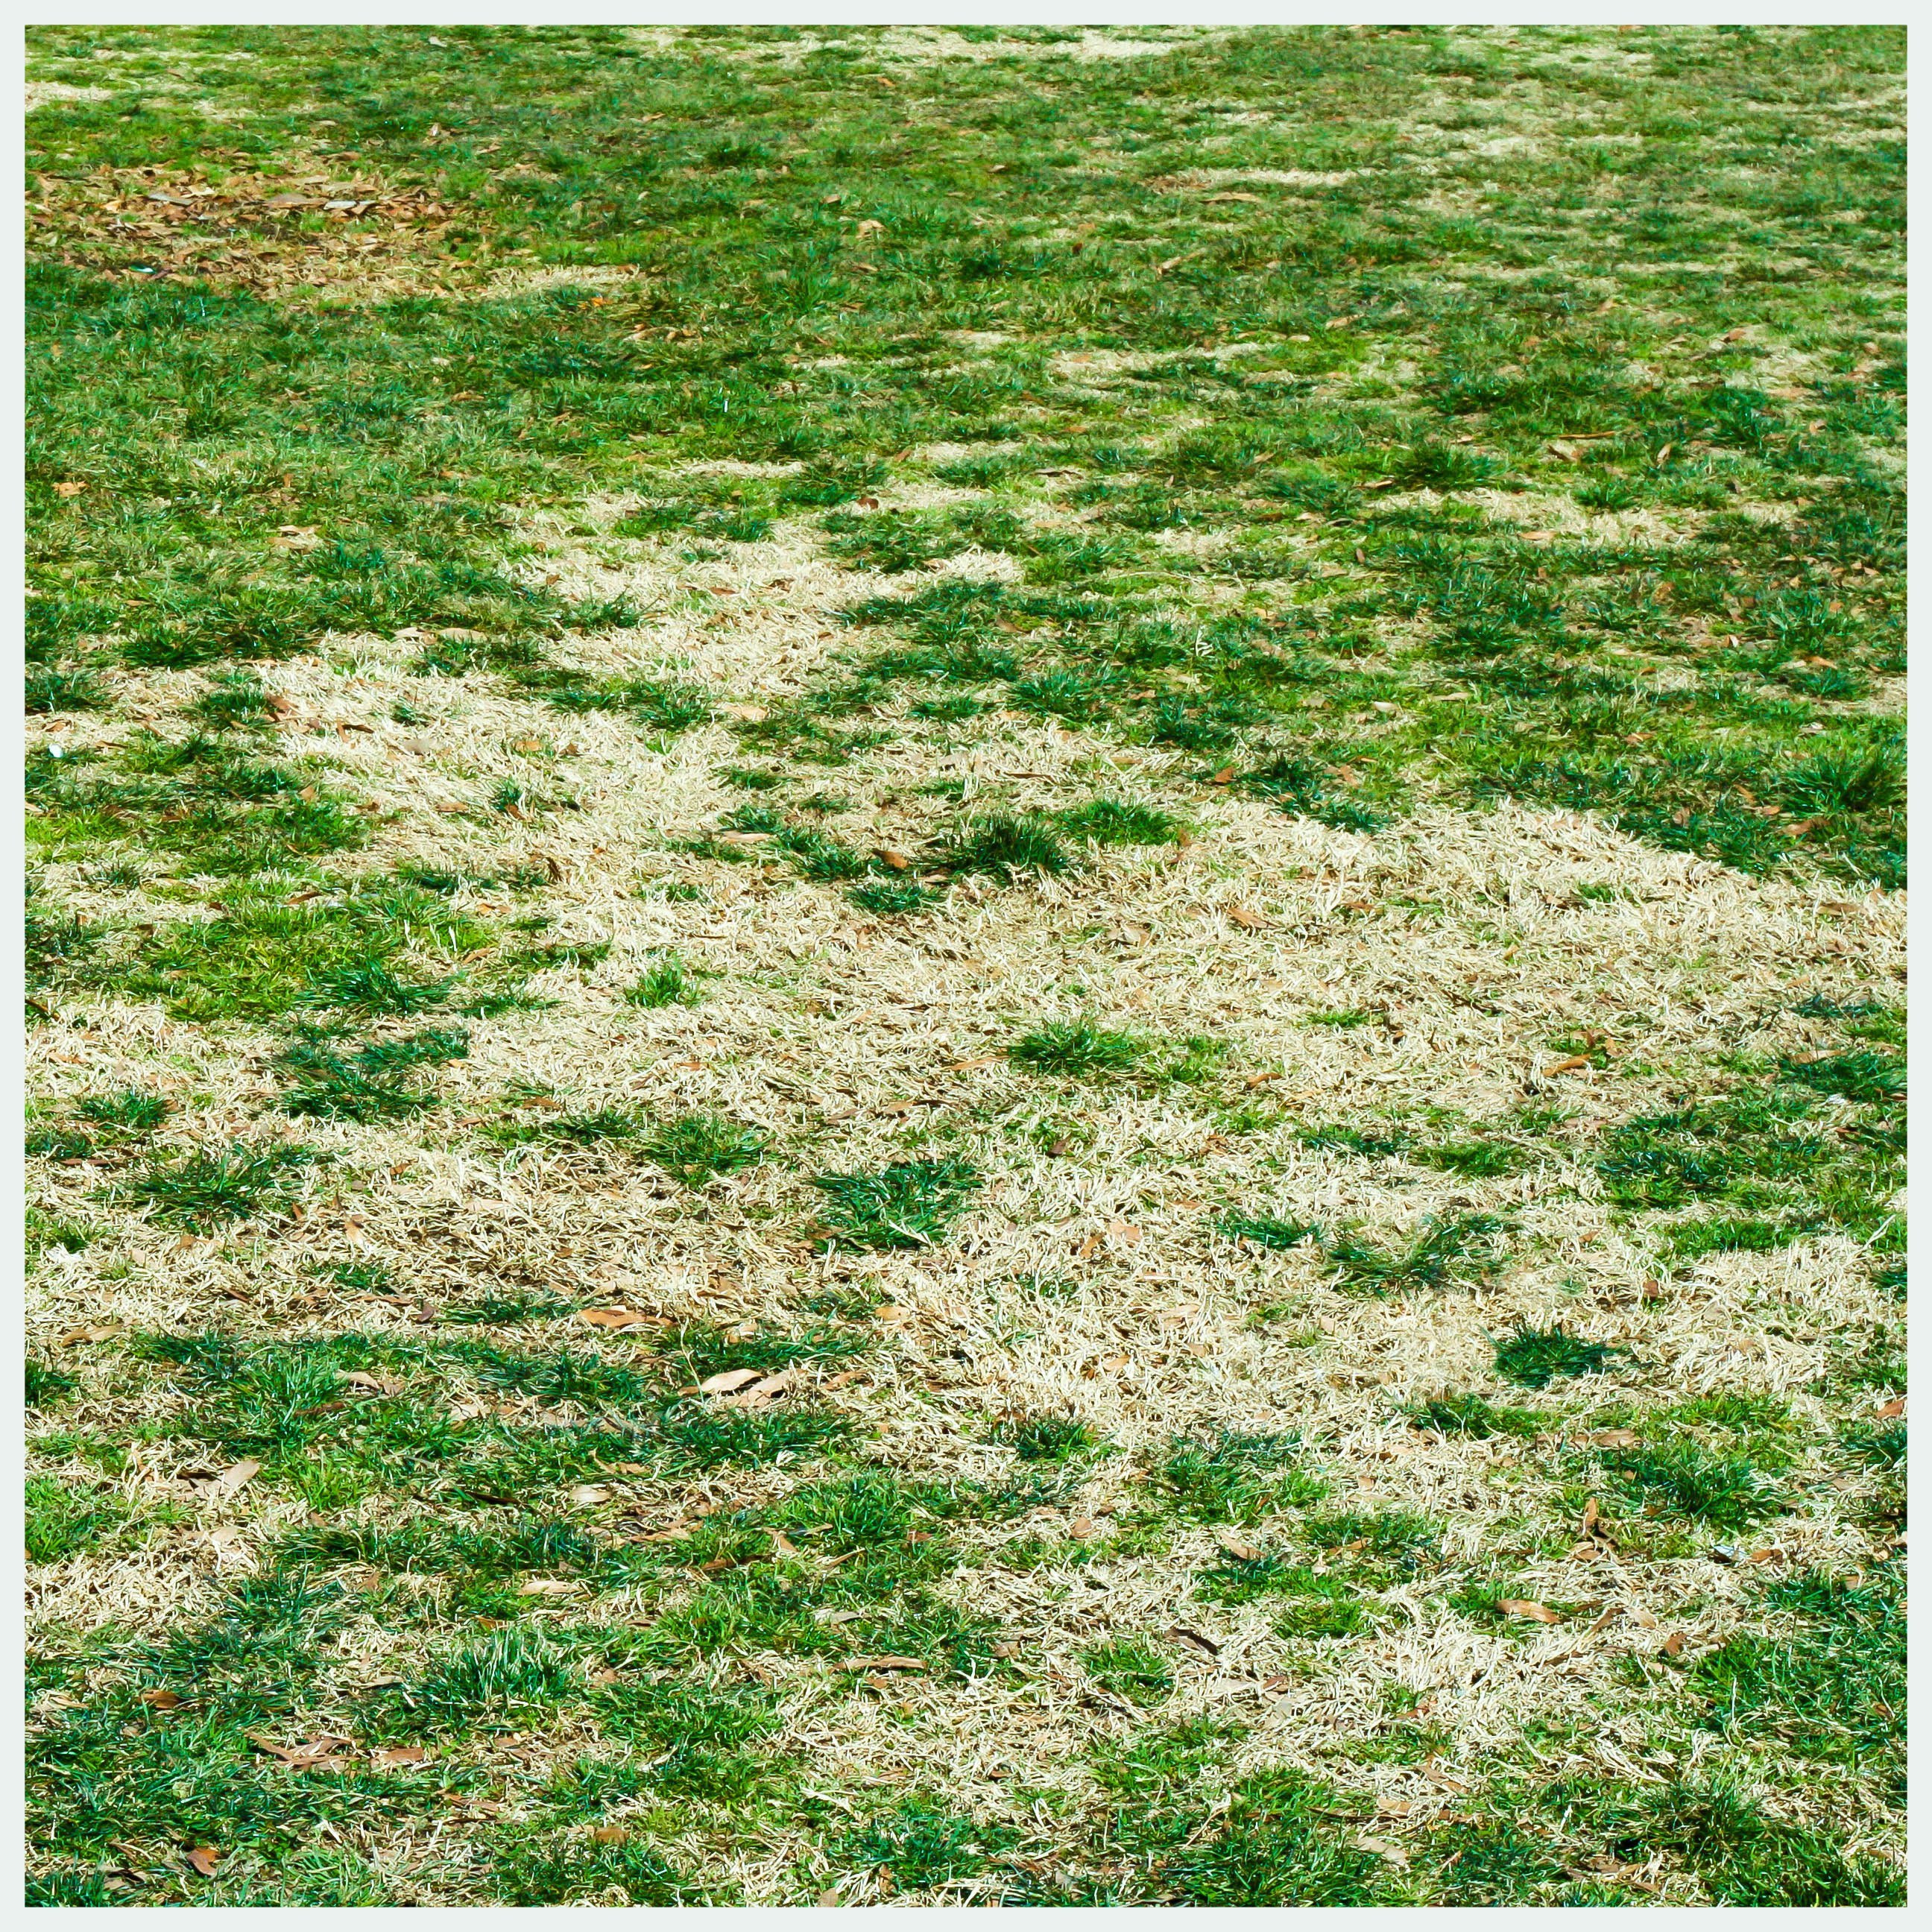 How can you get rid of grubs on grass?